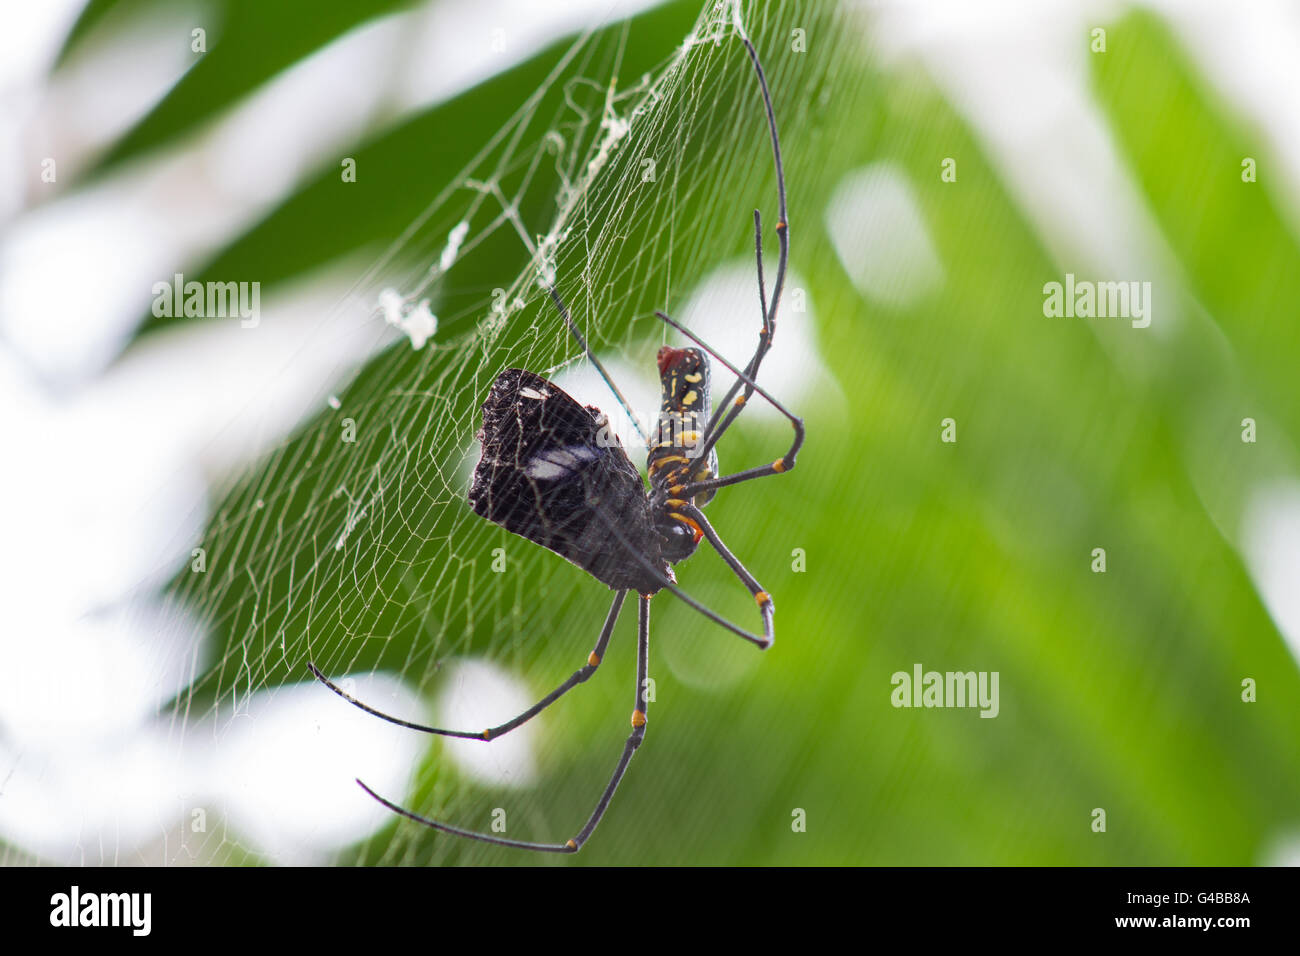 spider captures and eat lacewing butterfly Stock Photo